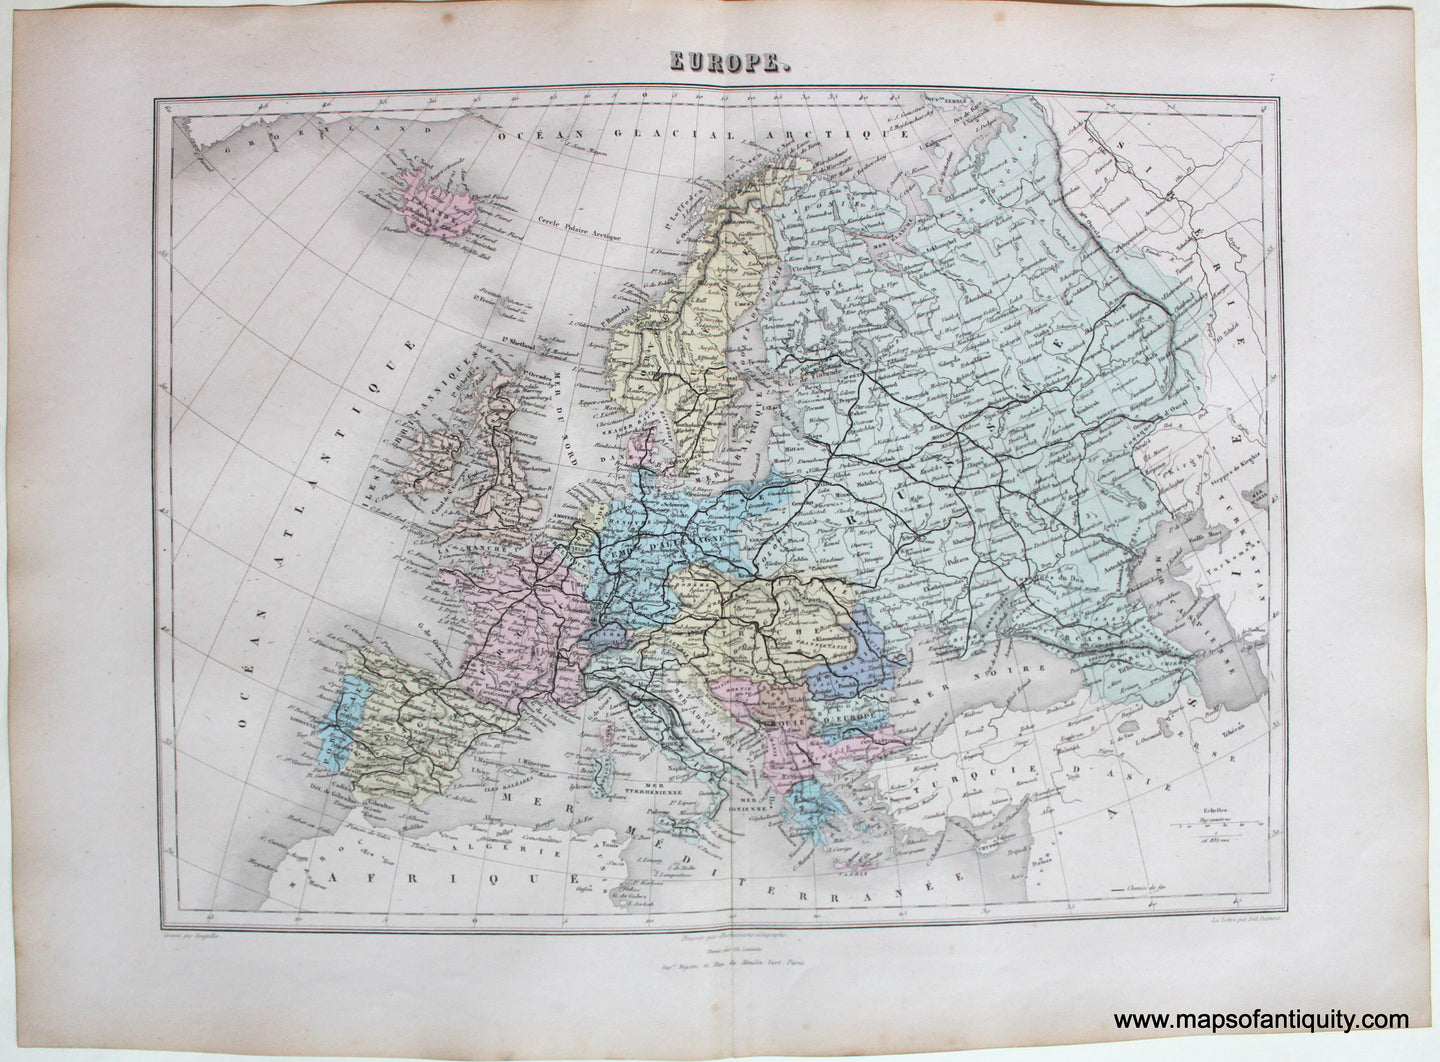 Antique-Hand-Colored-Map-1884-Migeon-Europe.-**********-